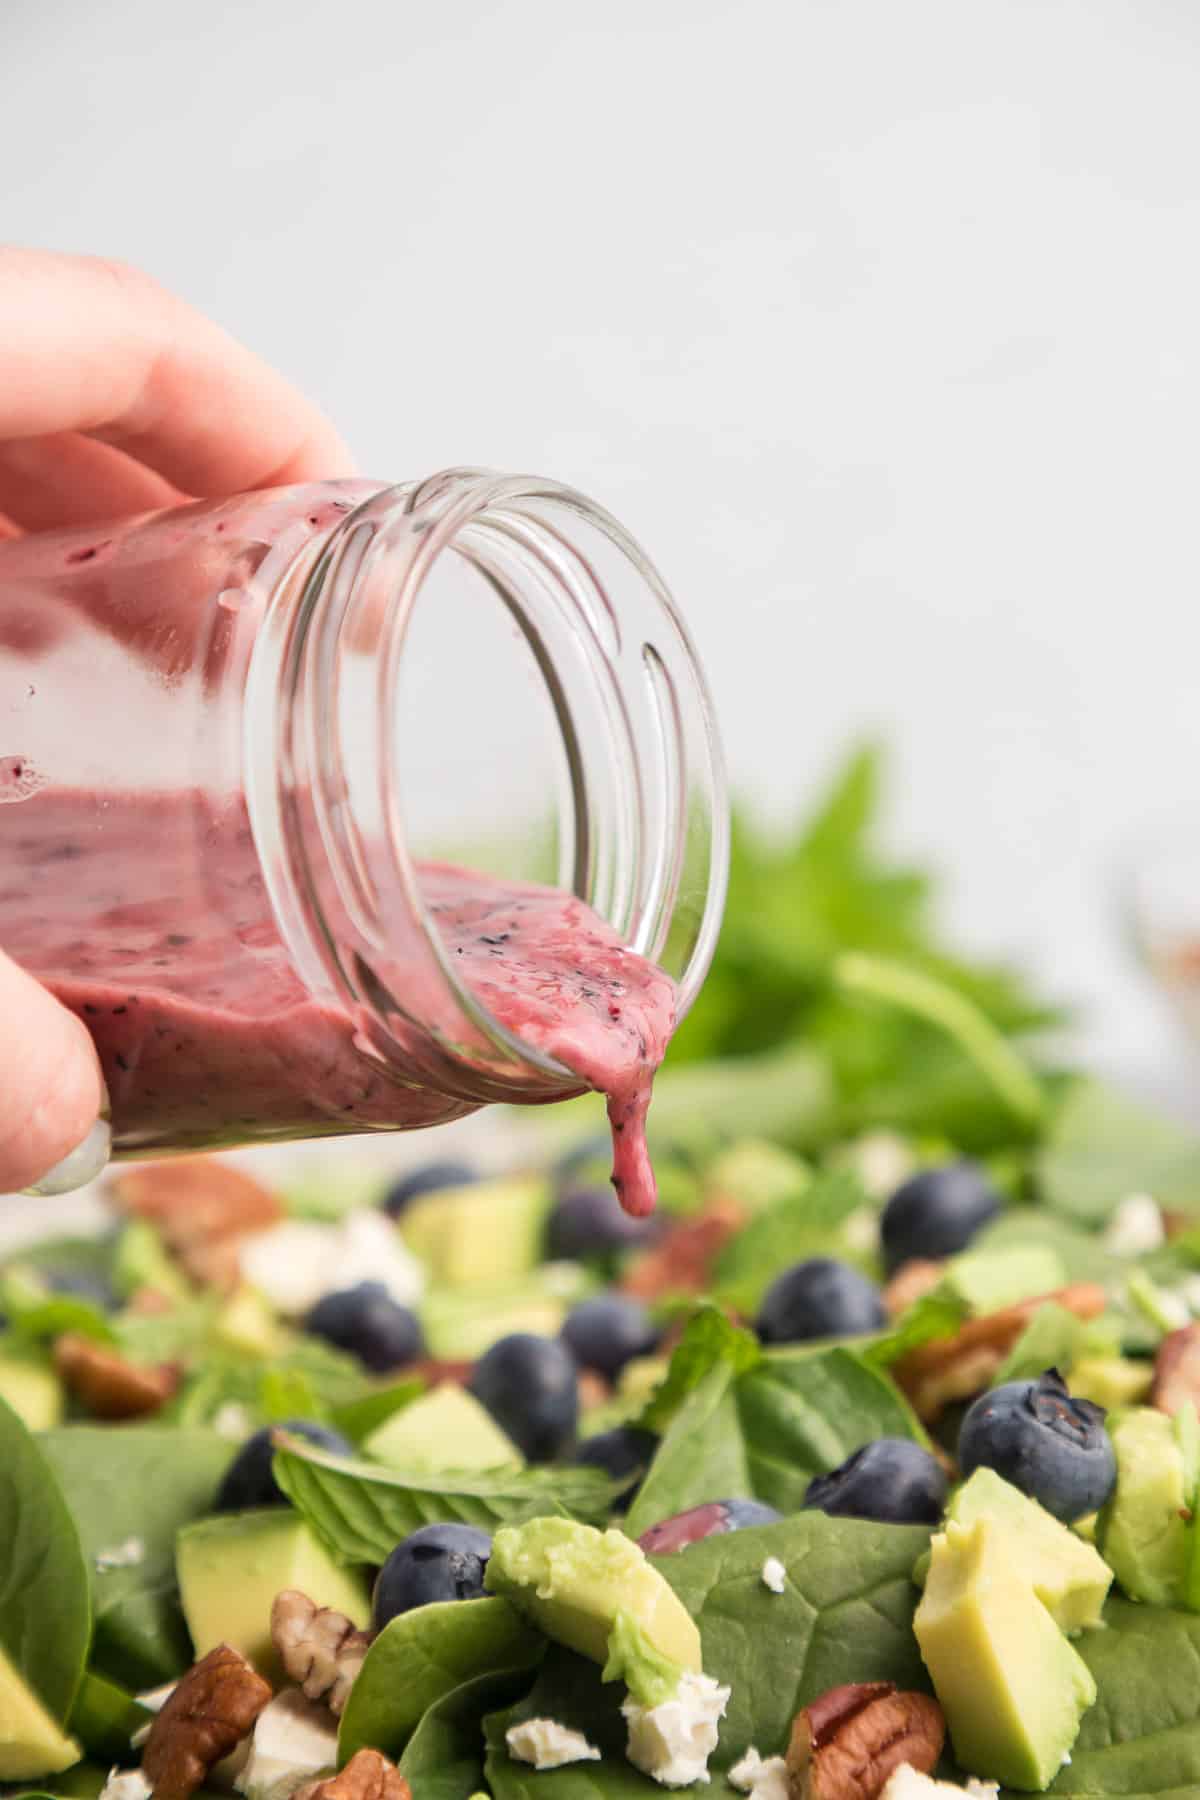 Blueberry salad dressing being poured over a salad.